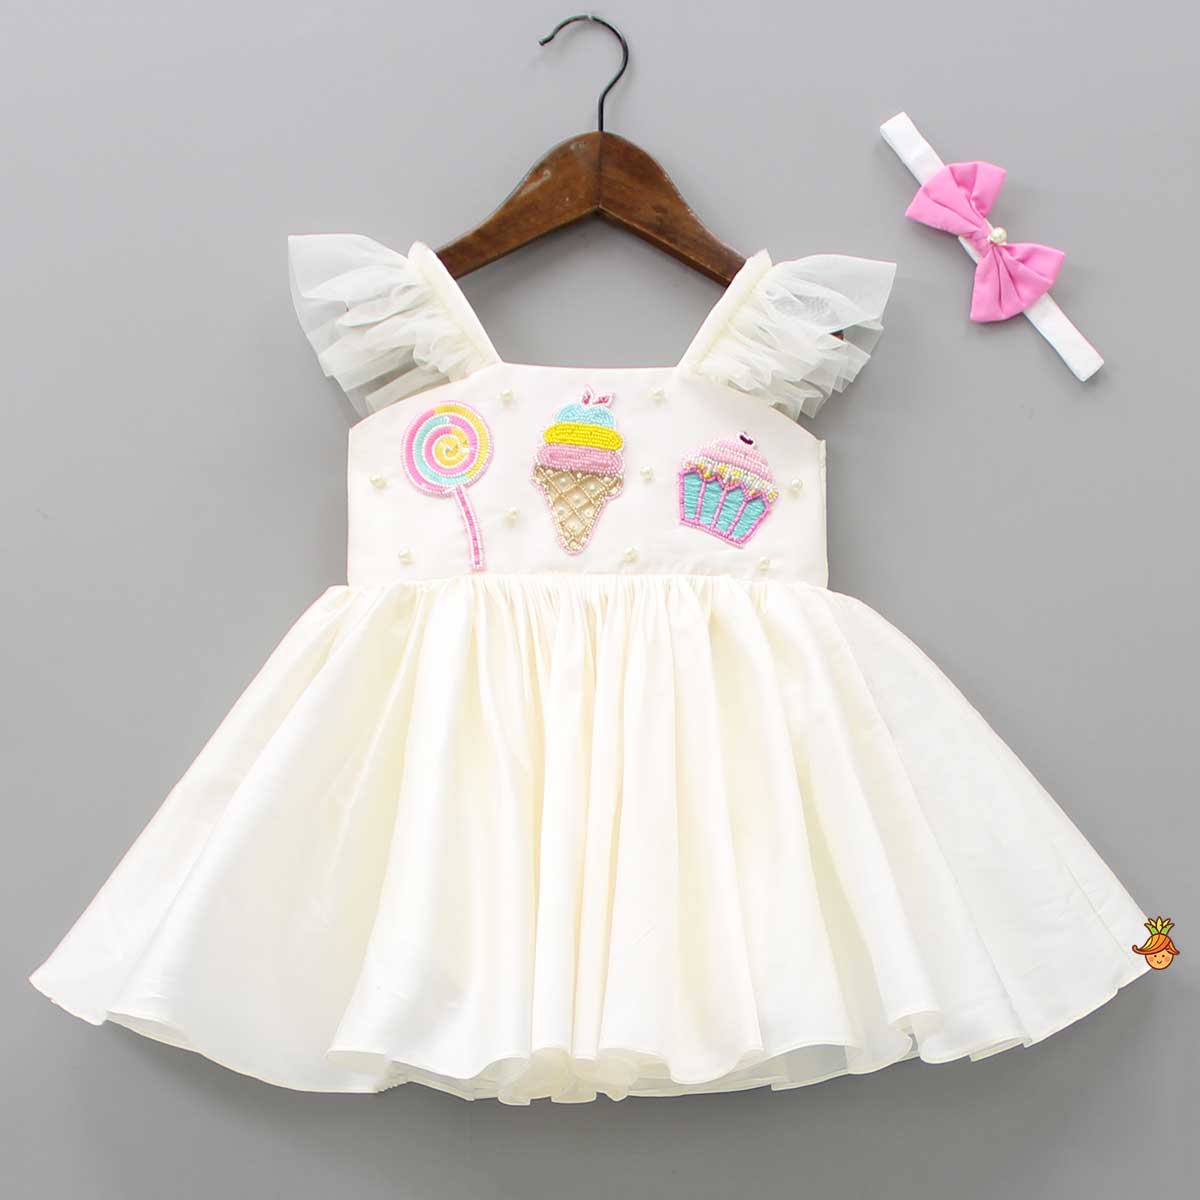 Off White Candies Embroidered Dress With Contrasting Pink Head Band